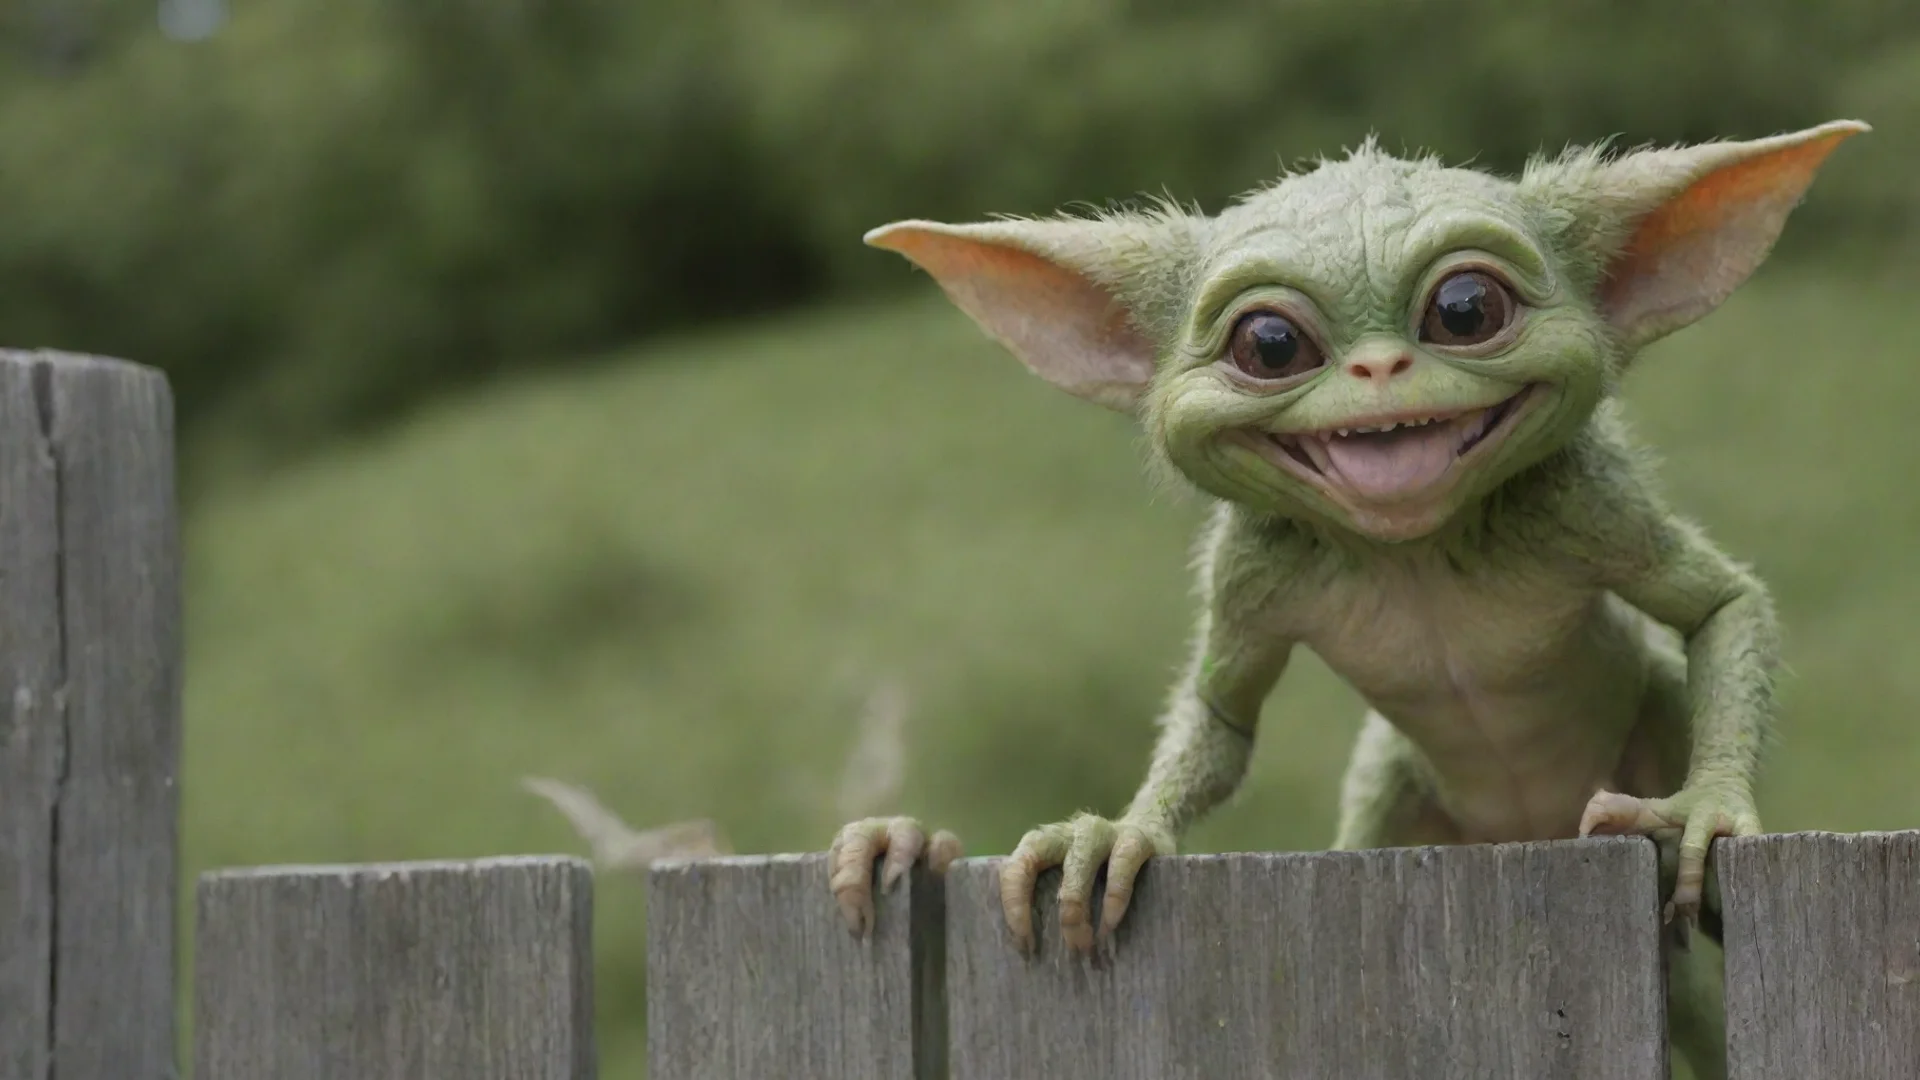 aigremlin sitting on a fence smiling wide